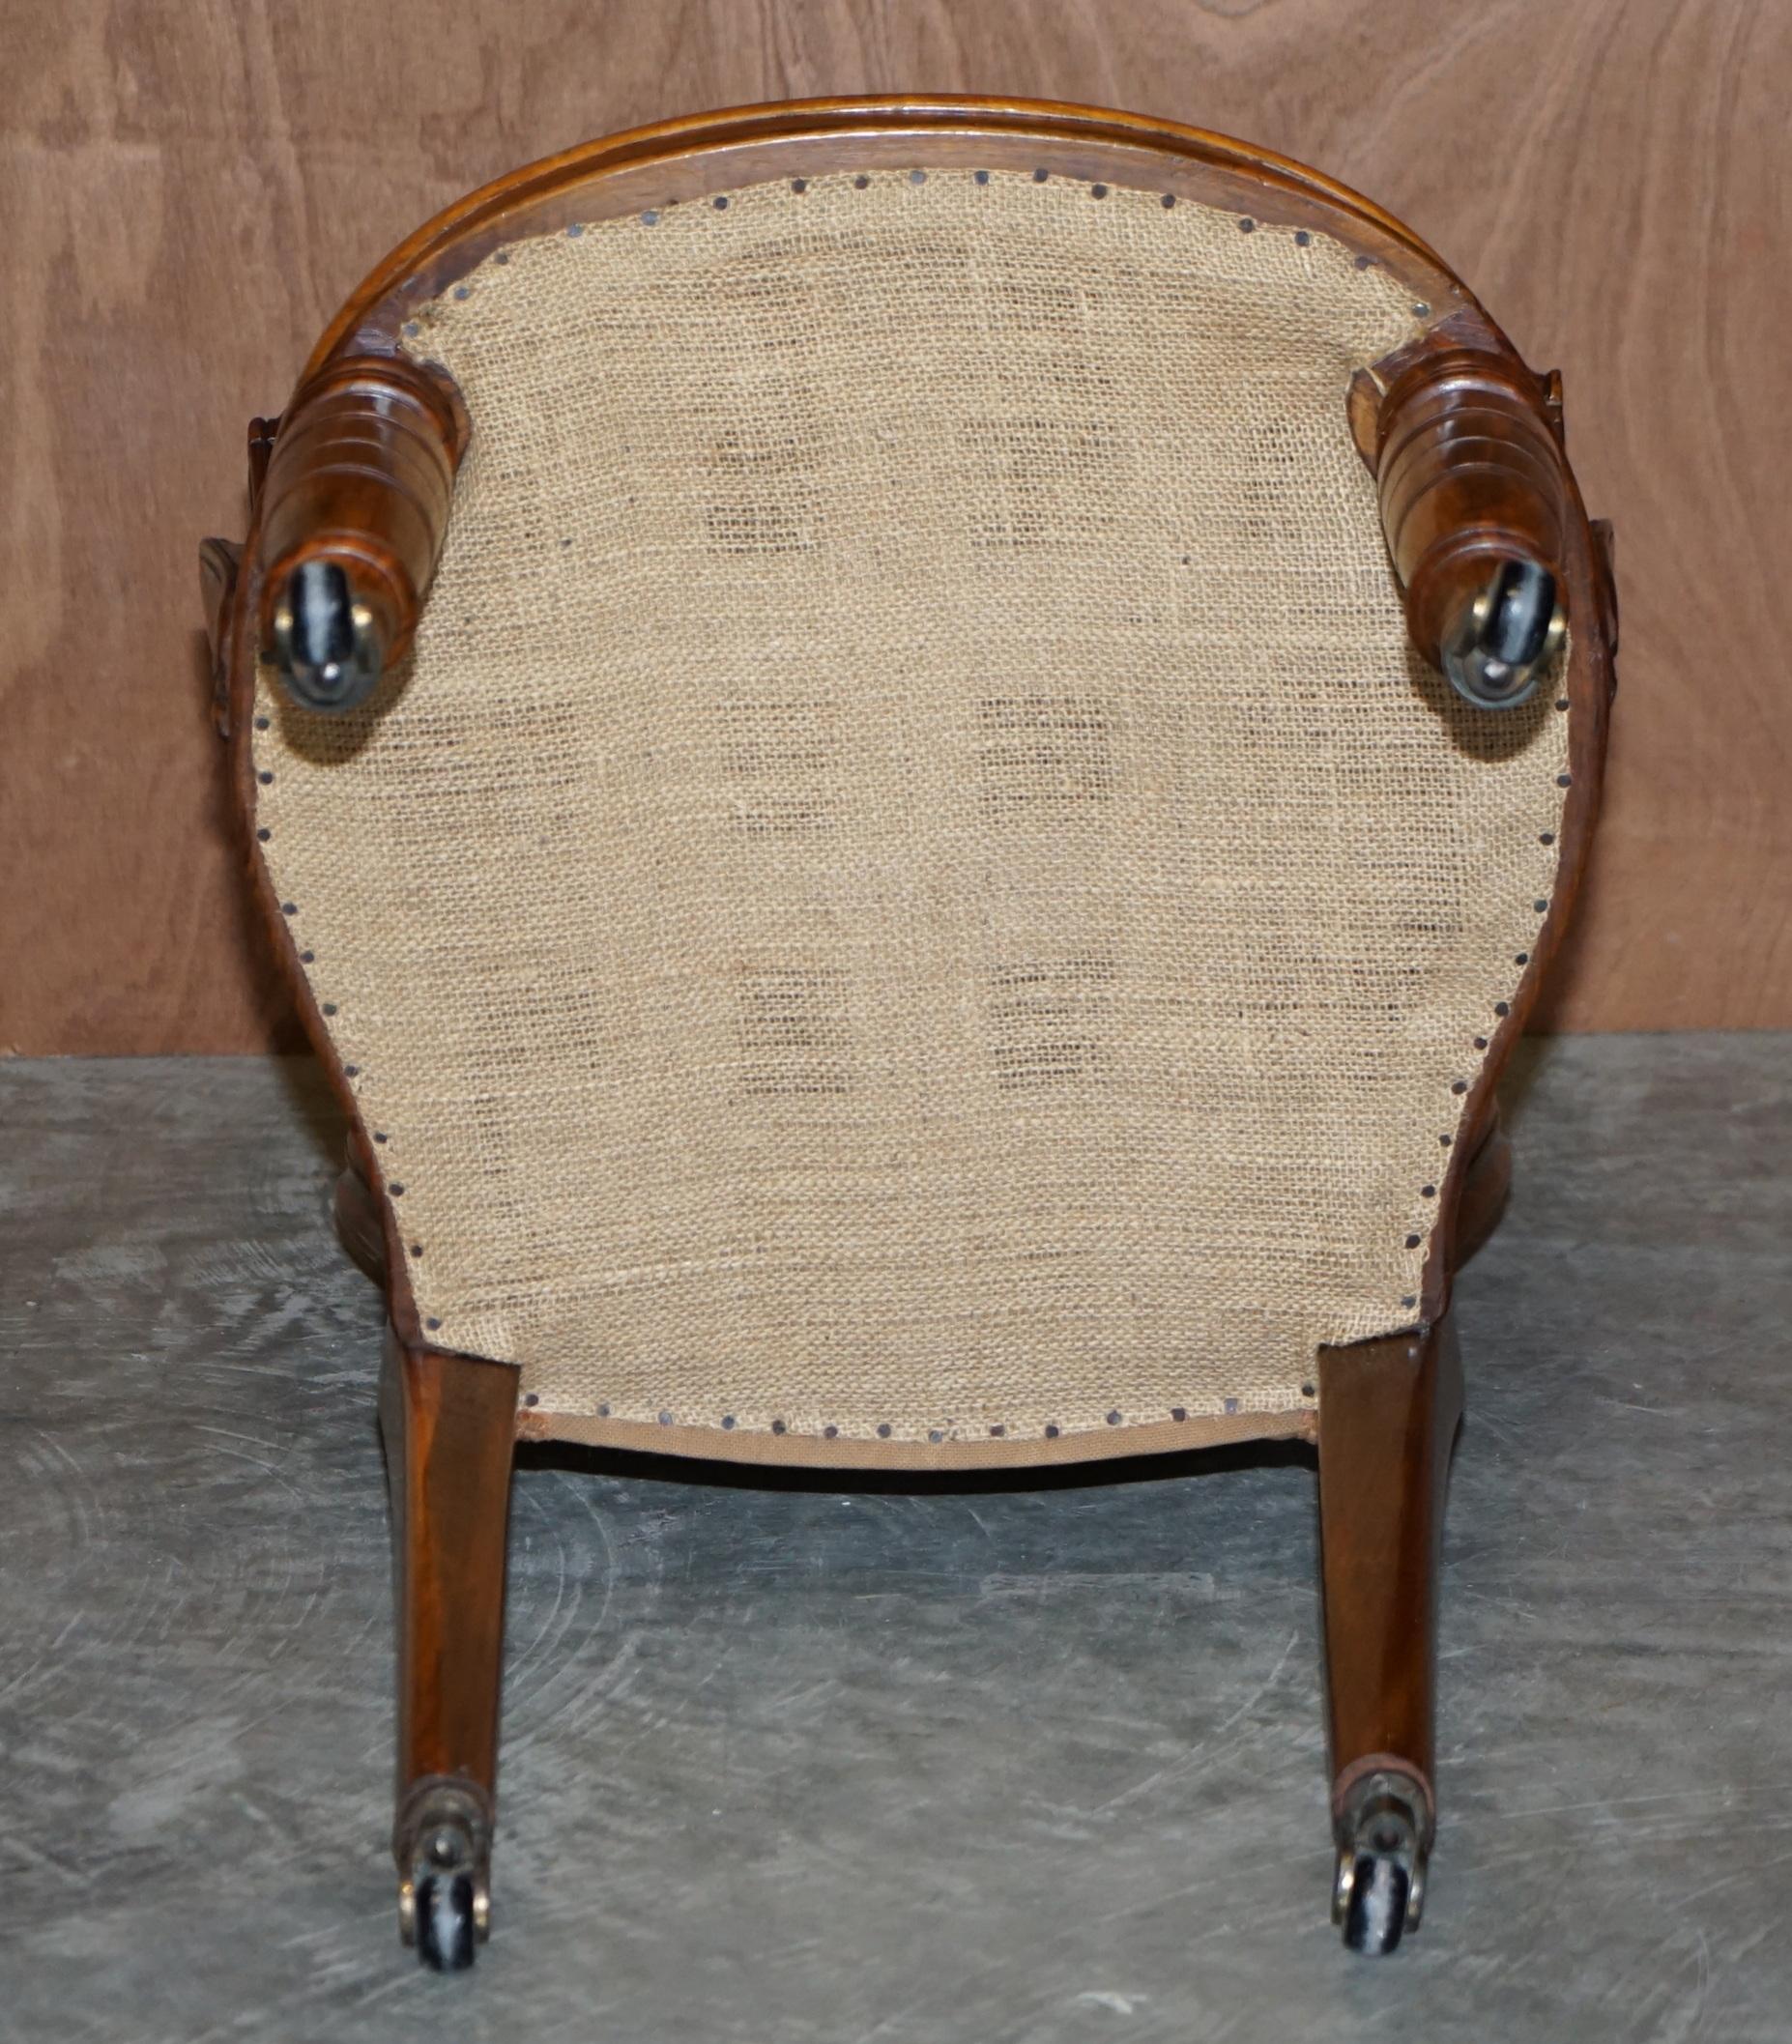 Antique circa 1860 Victorian Burr Walnut Armchair Royal Coat of Arms Armorial For Sale 13